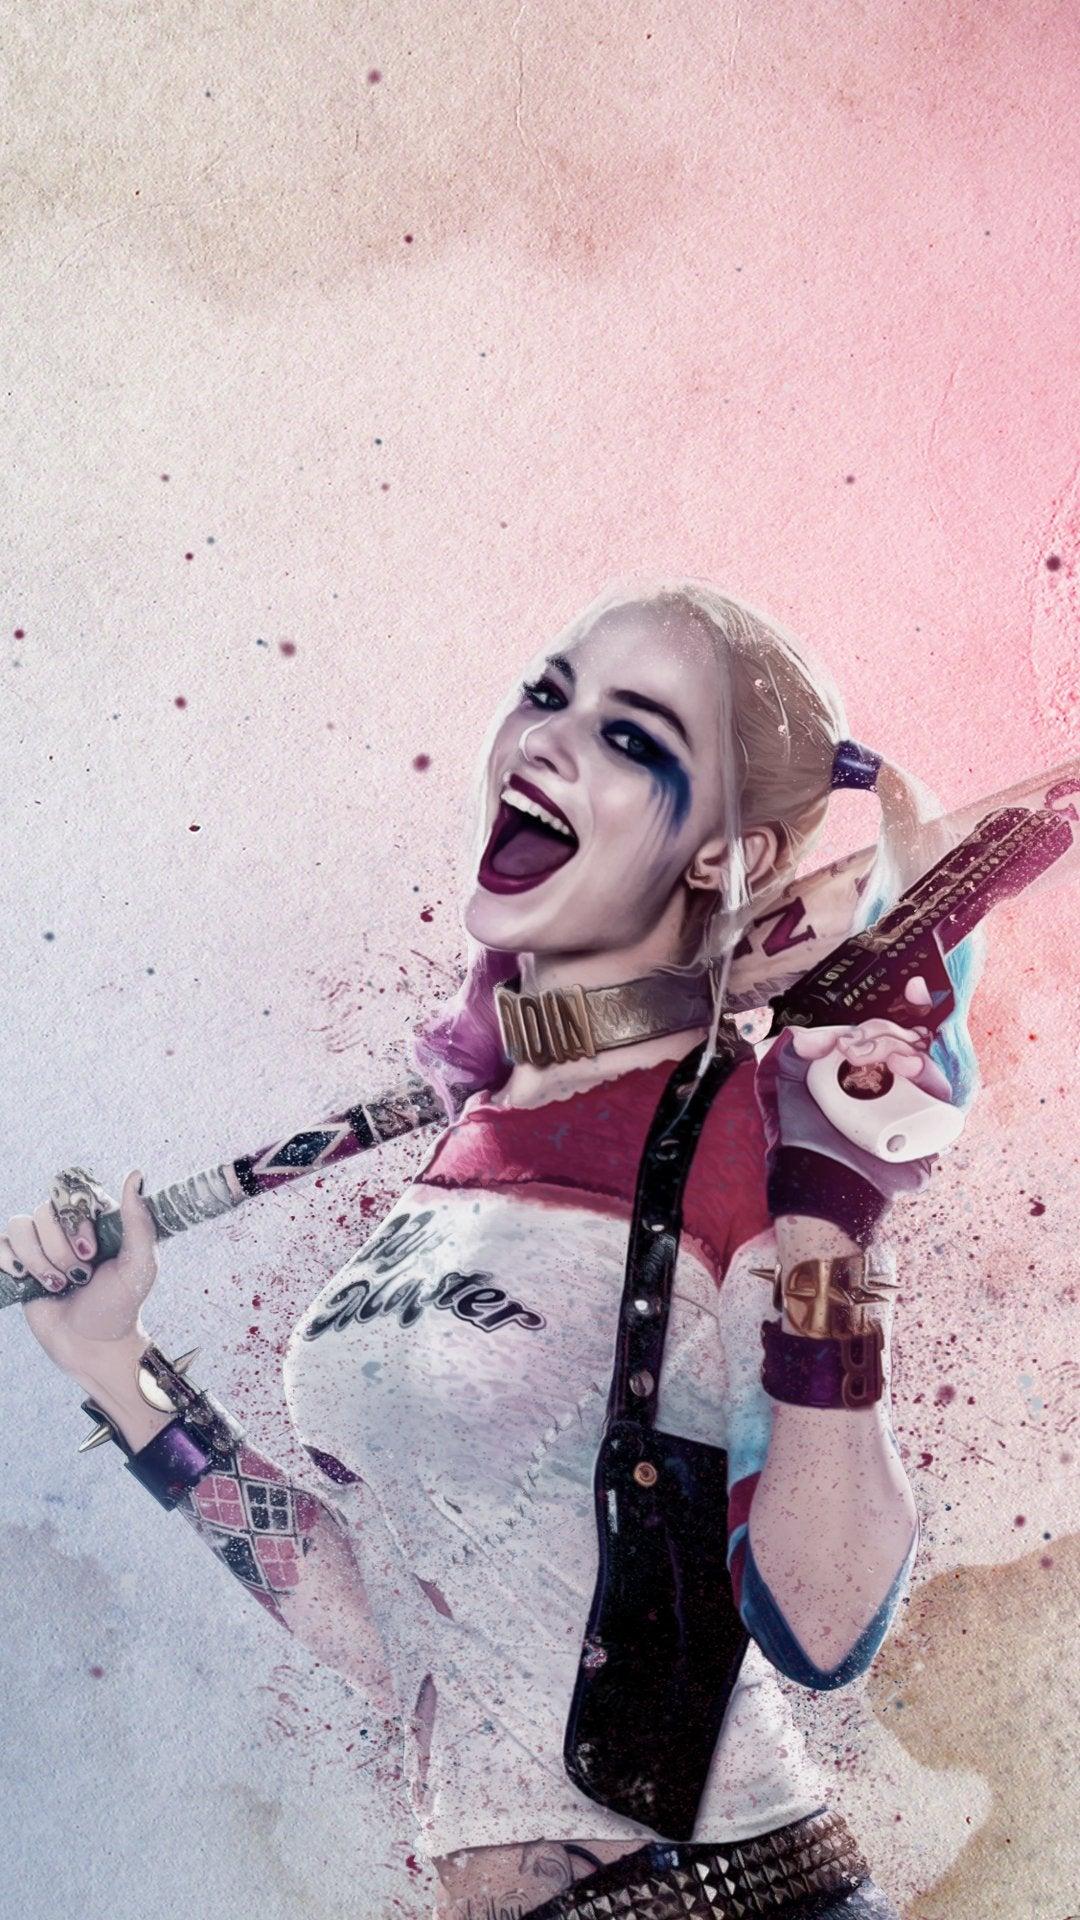 Suicide Squad Harley Quinn iPhone Wallpaper for anyone to enjoy